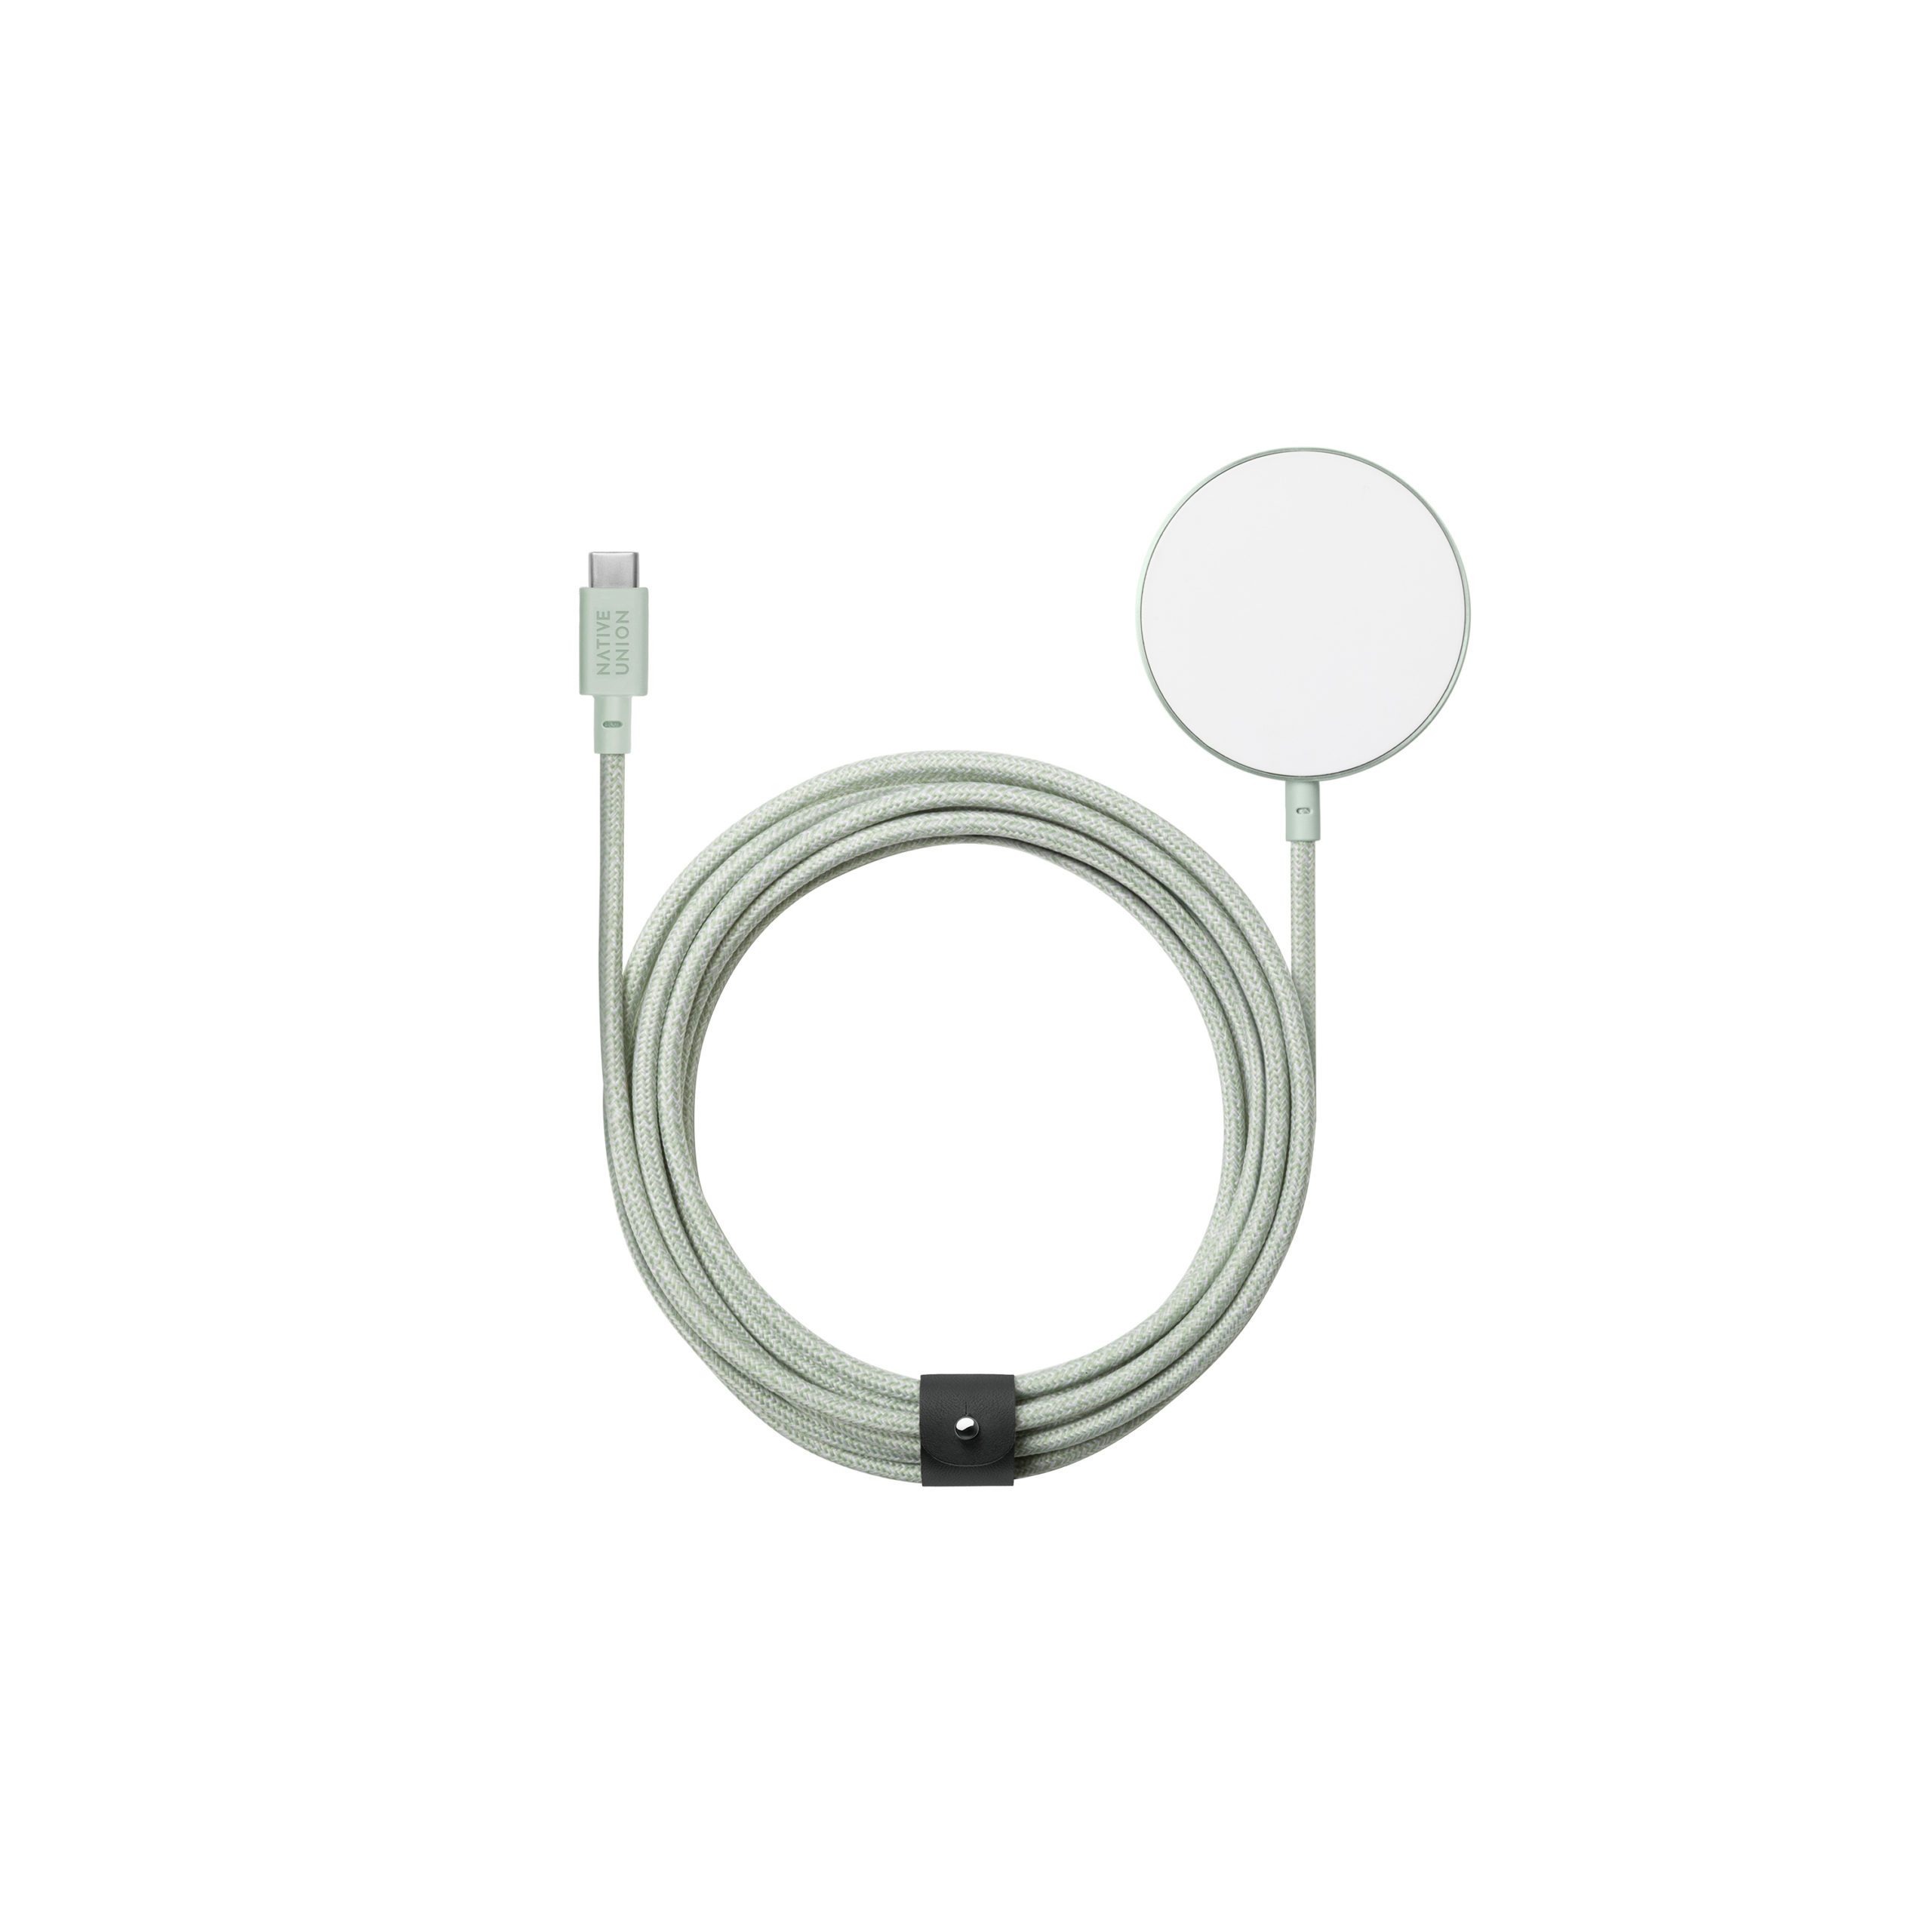 Snap Cable XL, Magnetic Wireless Charger, MagSafe&Qi compatible